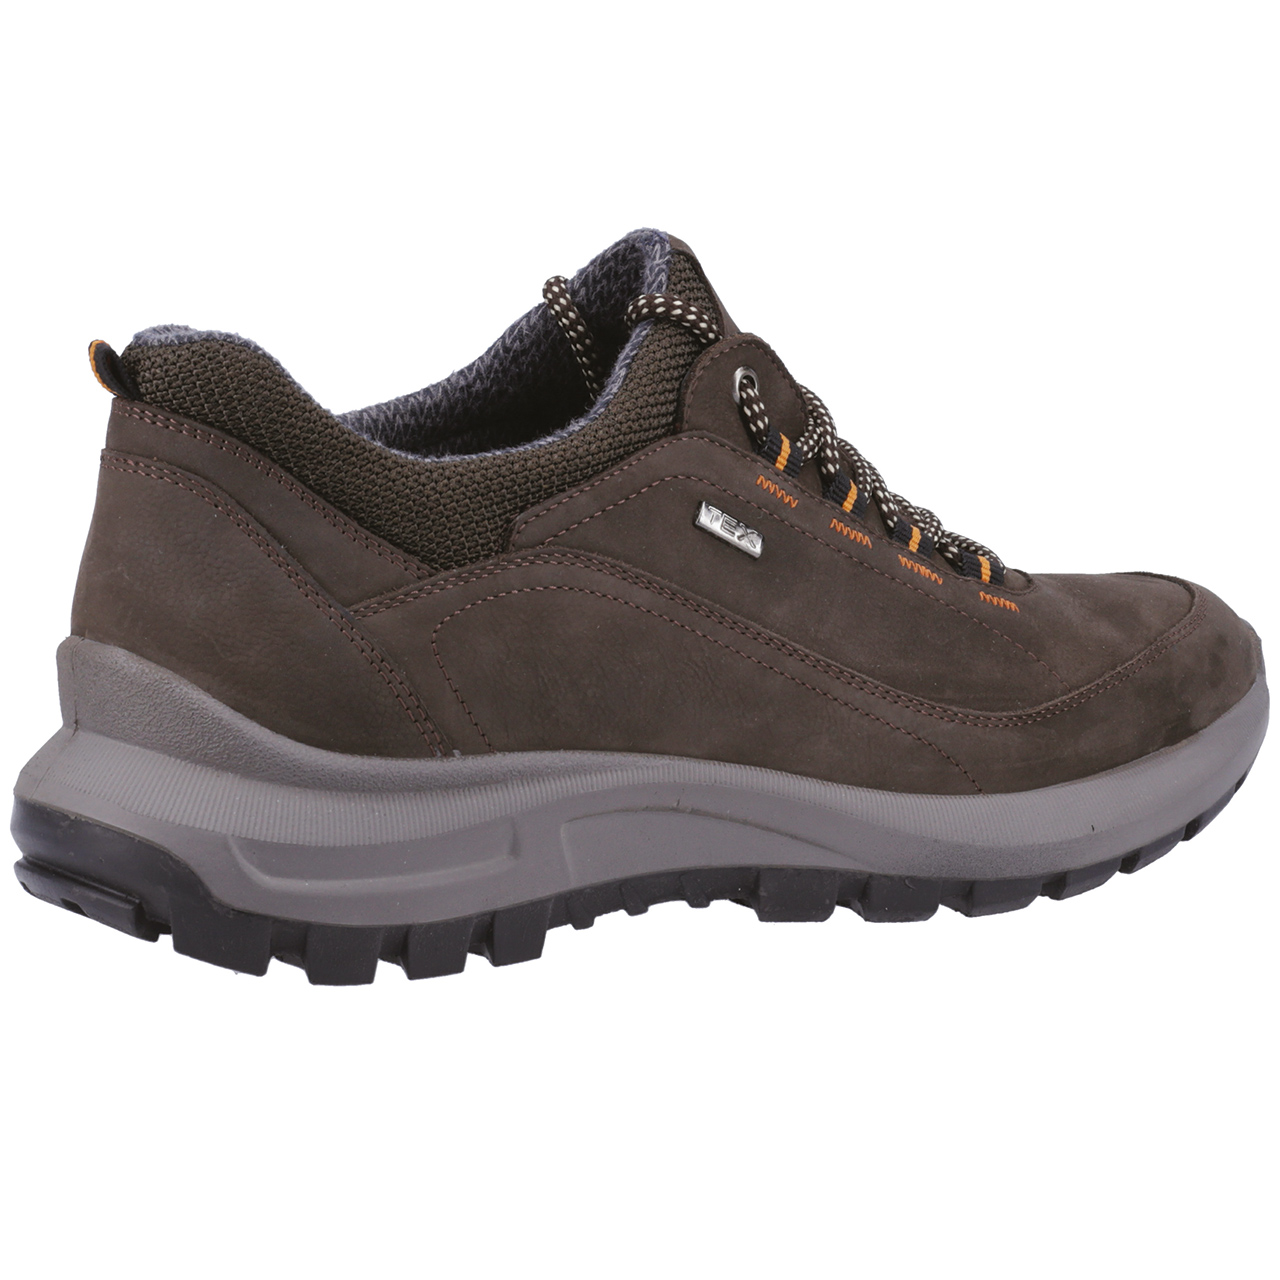 Dumbleton Lightweight Leather Waterproof Shoes